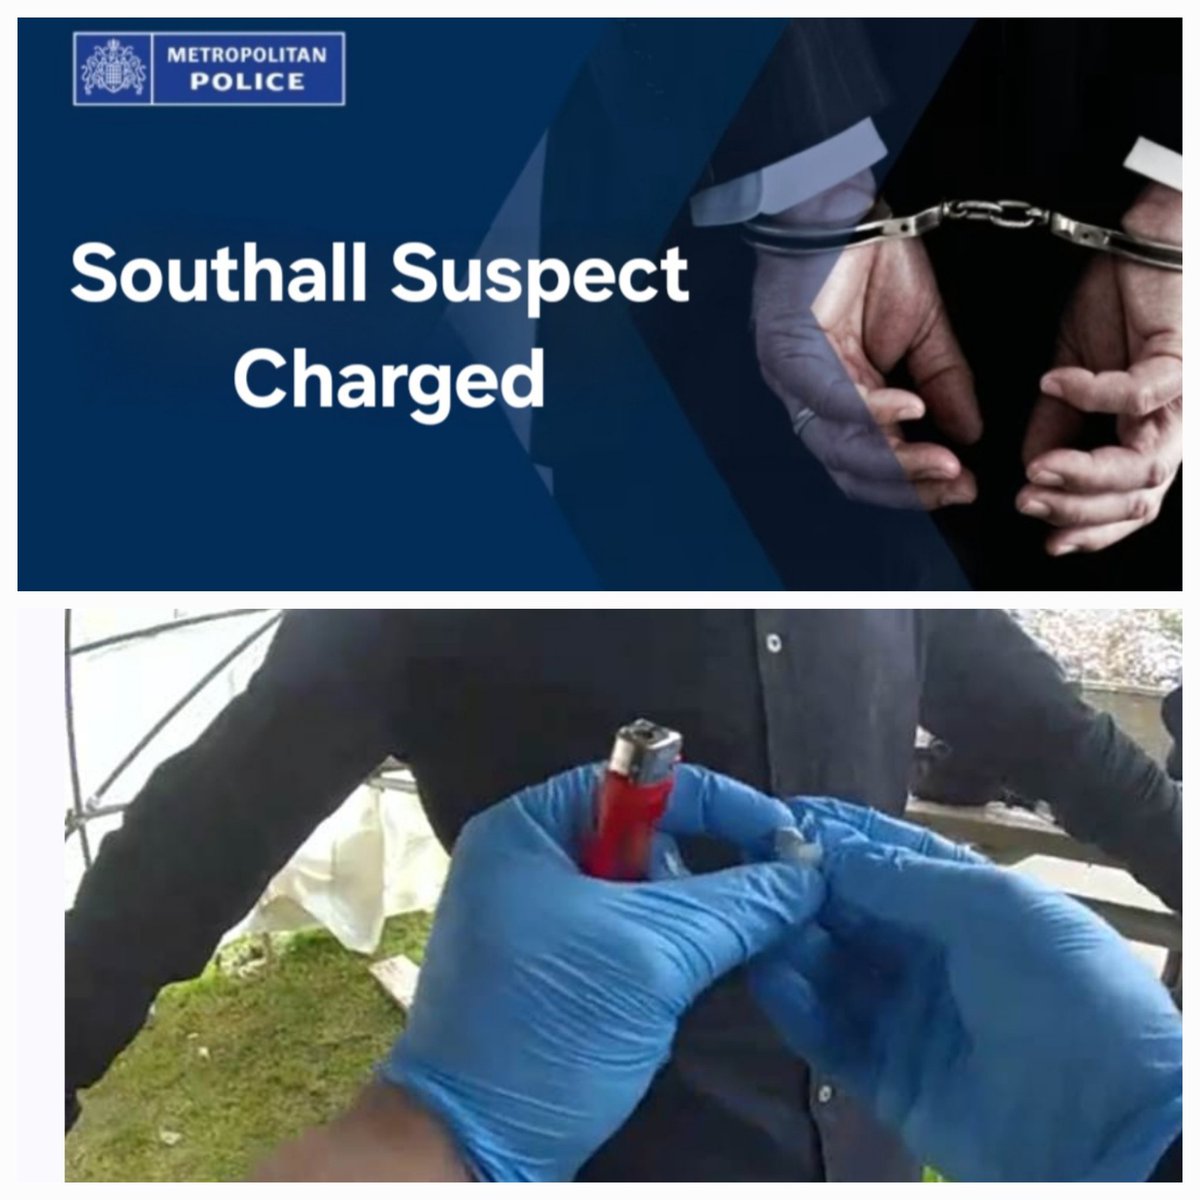 A suspect has been charged for possession of Class A crack after a positive stop & search by officers. The suspect was openly using drugs close to the Gurdwara on Guru Nanak Road

#notonourwatch